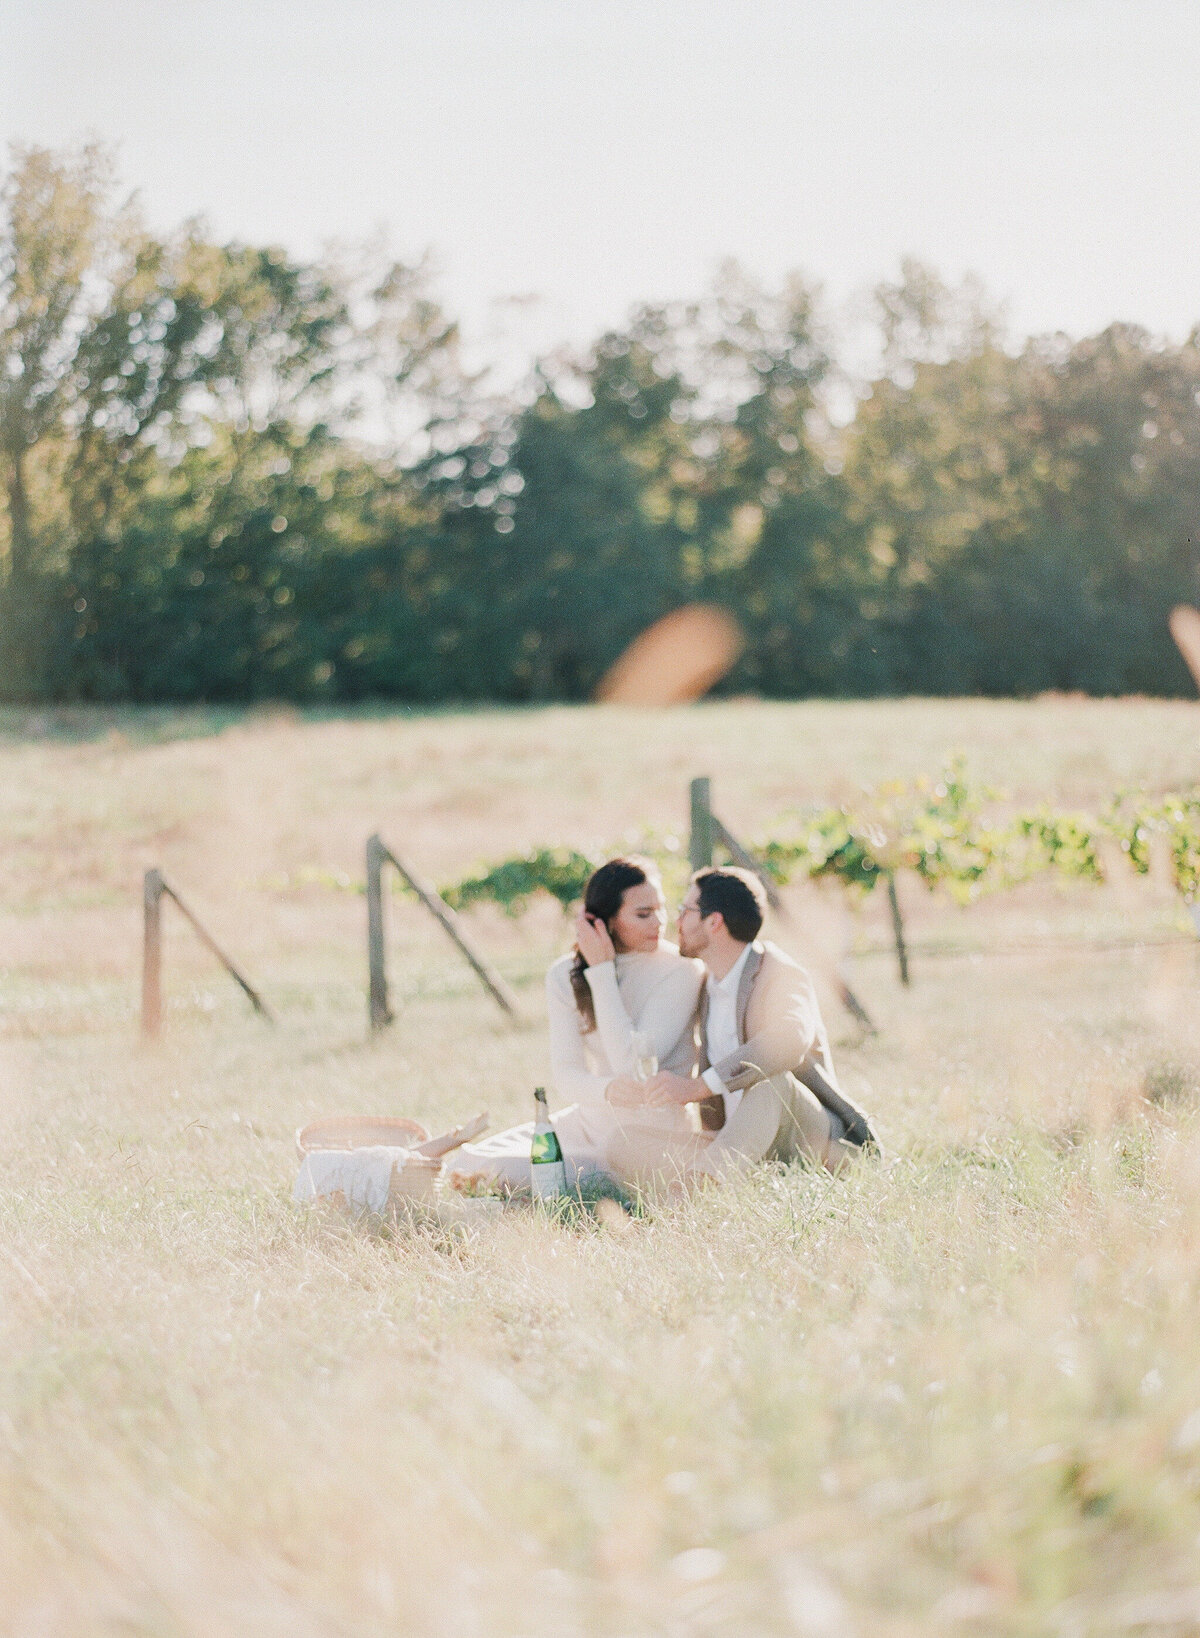 French Vineyard Engagement Photography at The Meadows in Raleigh, NC 17